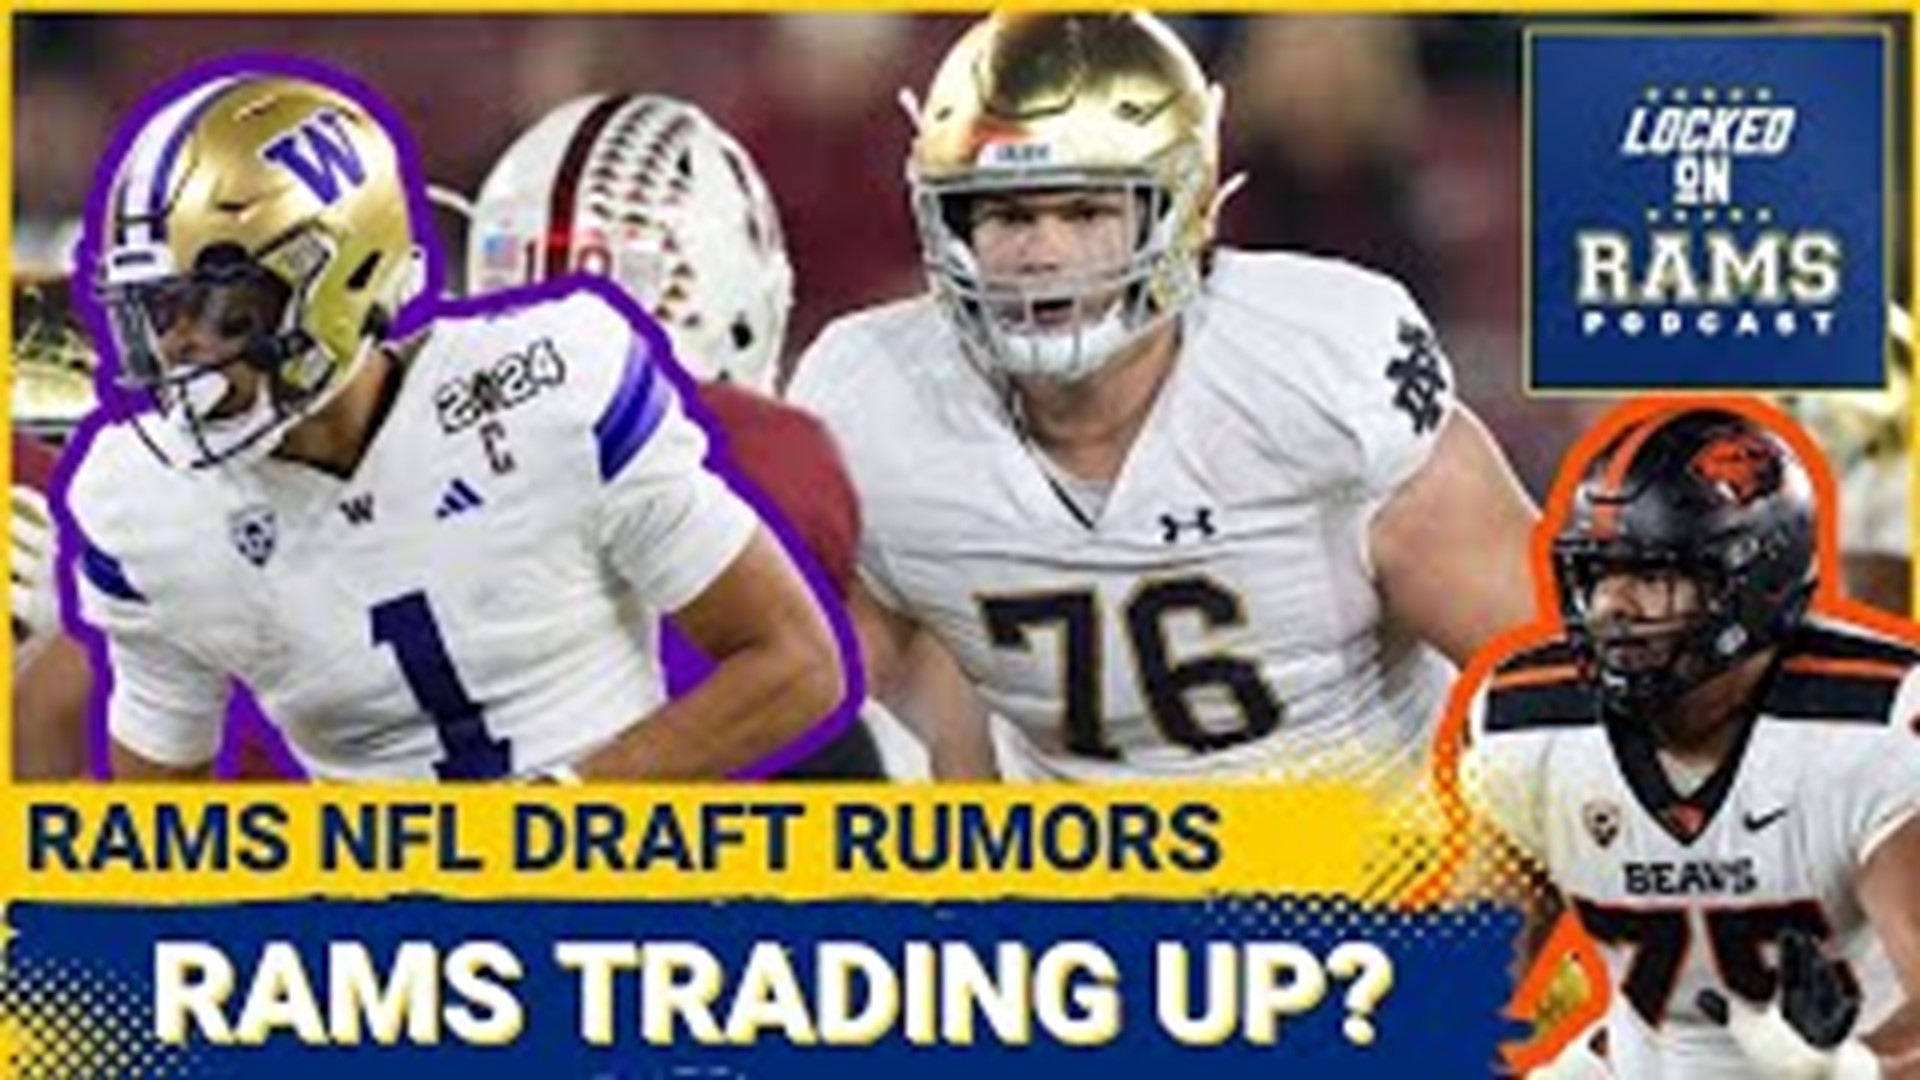 The Los Angeles Rams are rumored to be interested in trading up in this week's NFL Draft. D-mac and Travis discuss if the Rams should look to trade and their target.